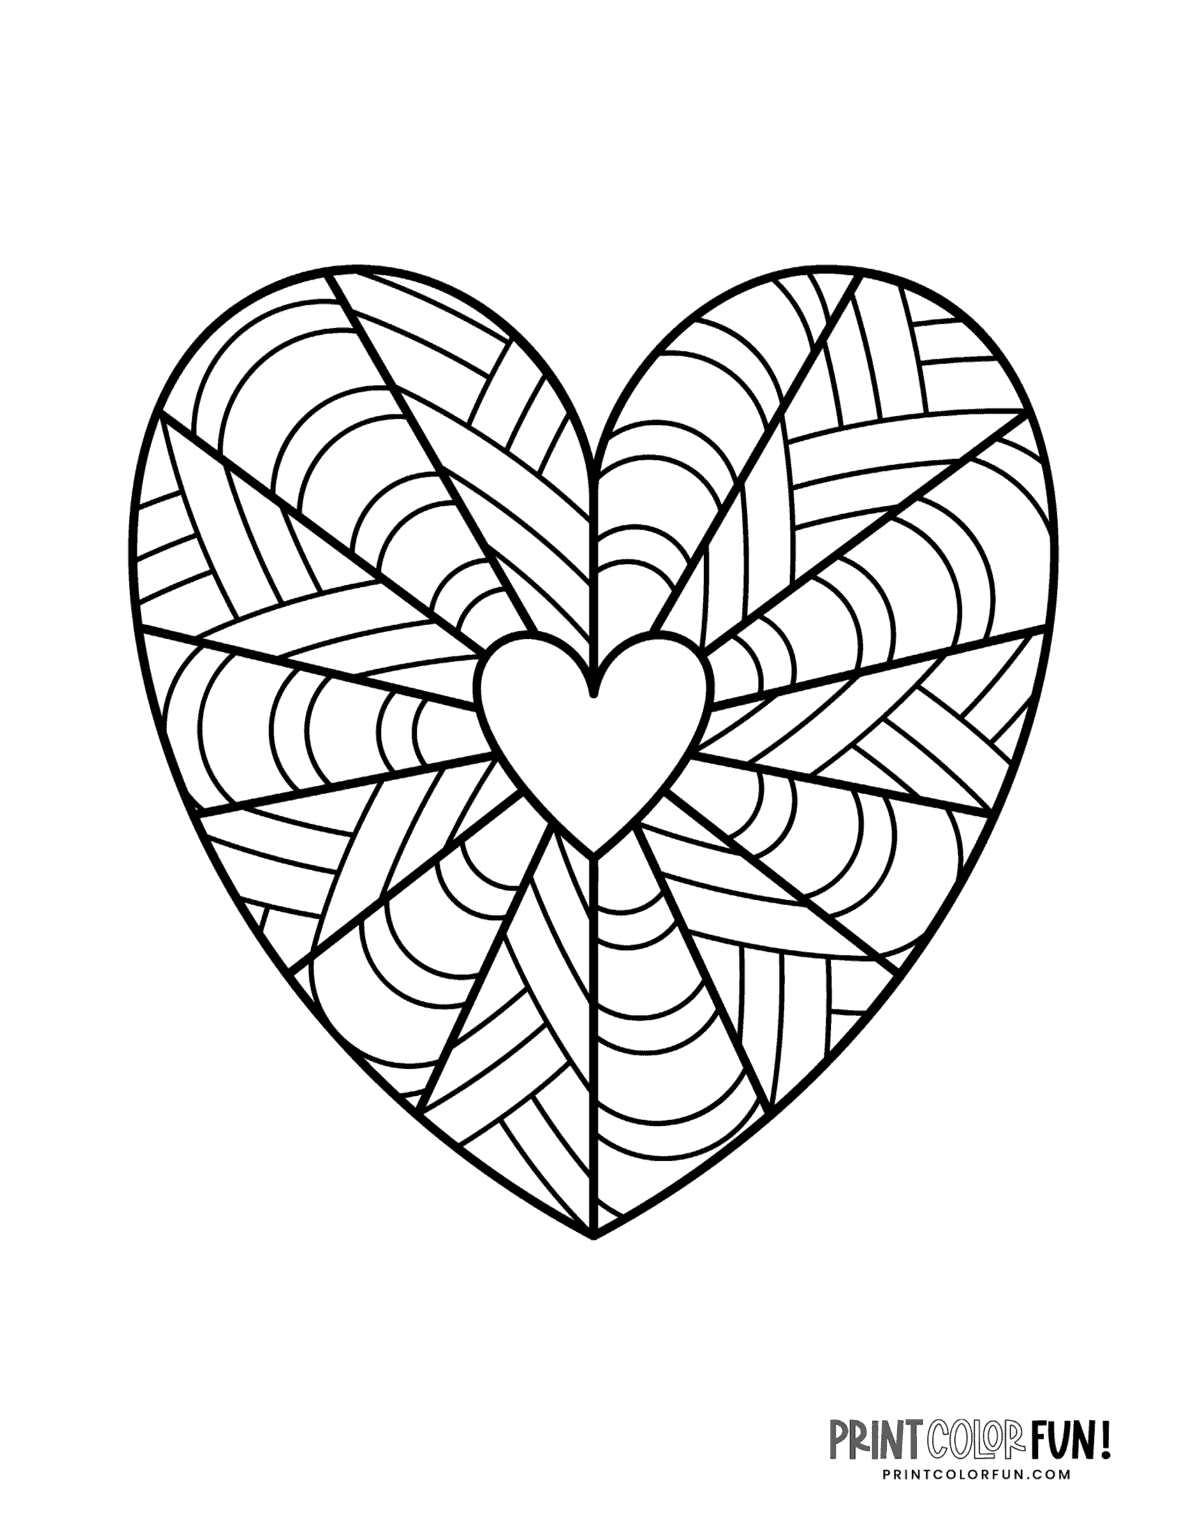 Heart Coloring Pages Free Printable Coloring Pagescol - vrogue.co